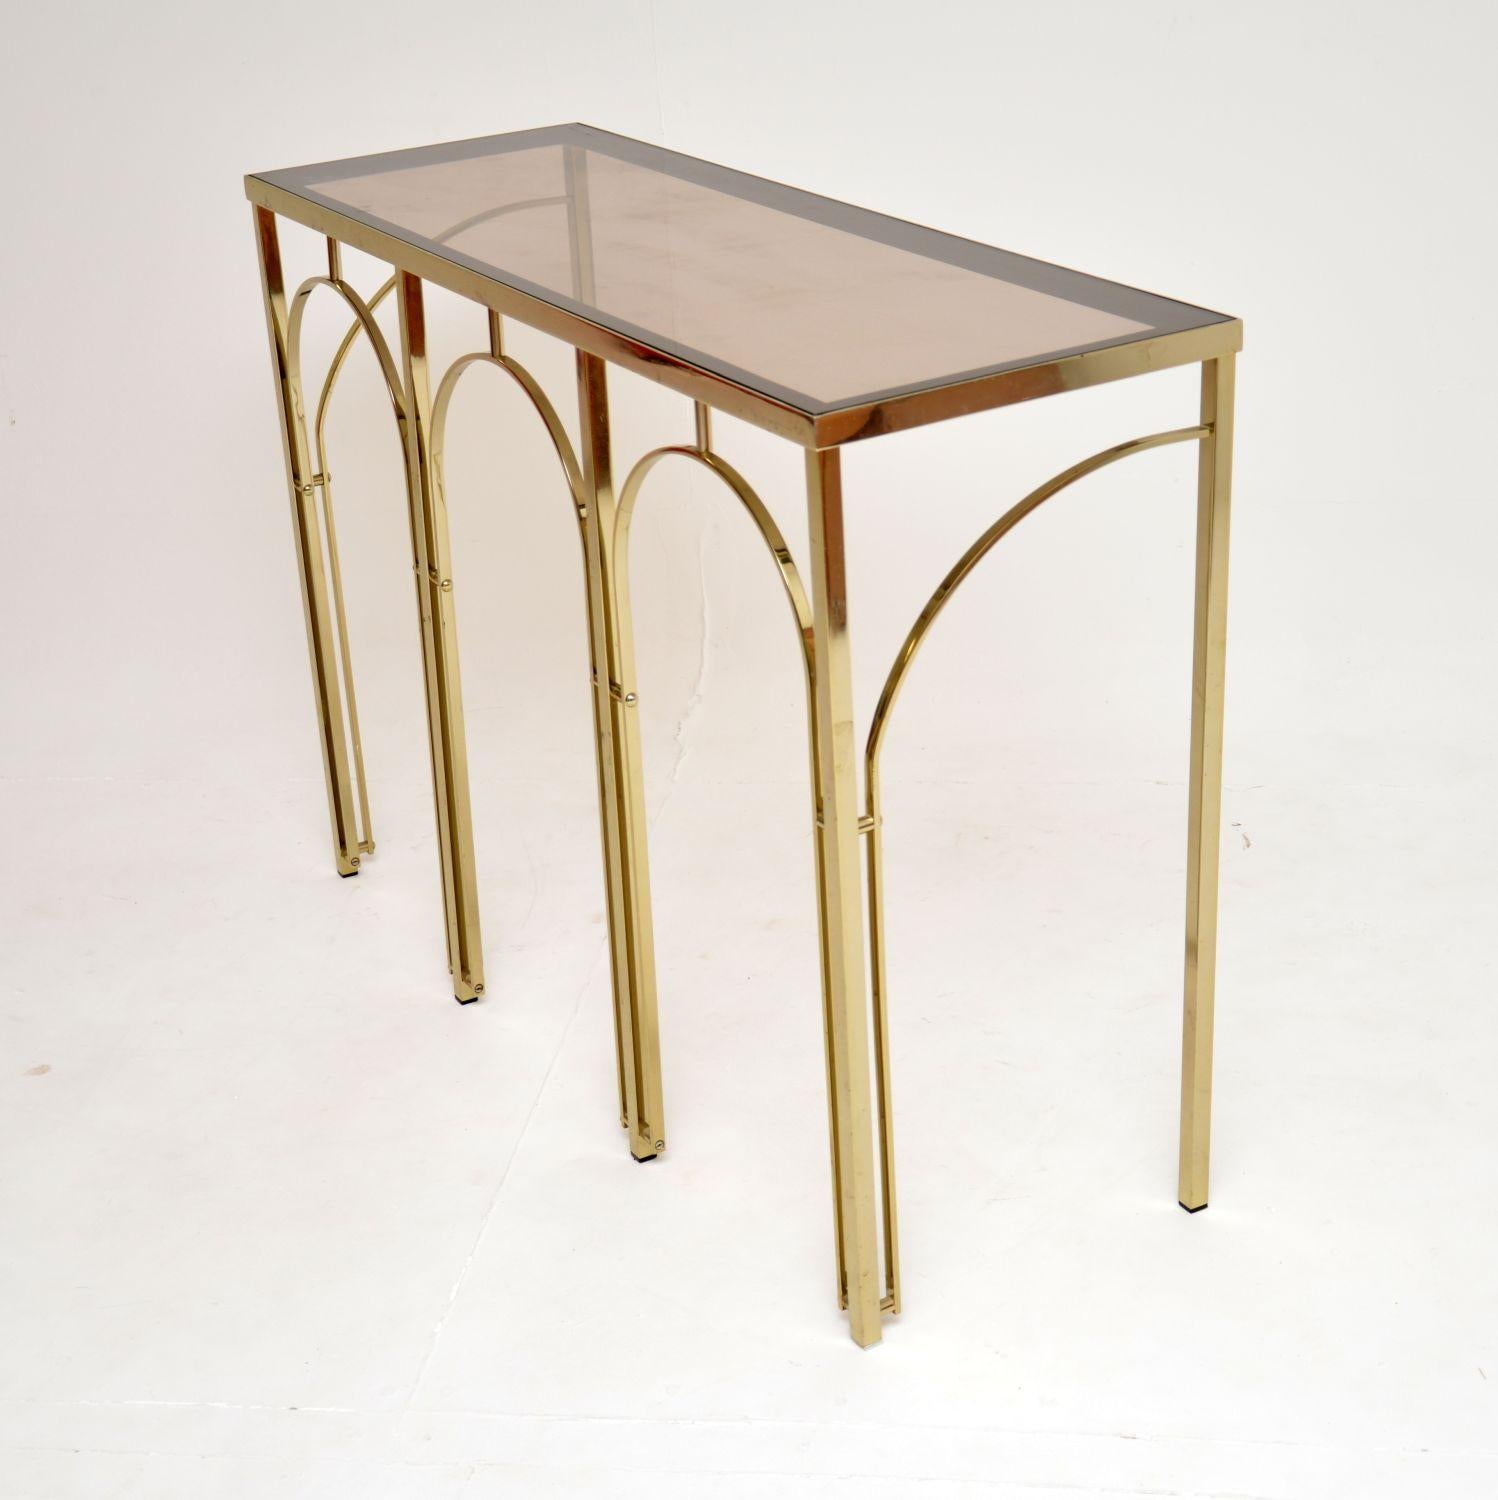 1970s Vintage Italian Brass & Glass Console Table In Good Condition For Sale In London, GB